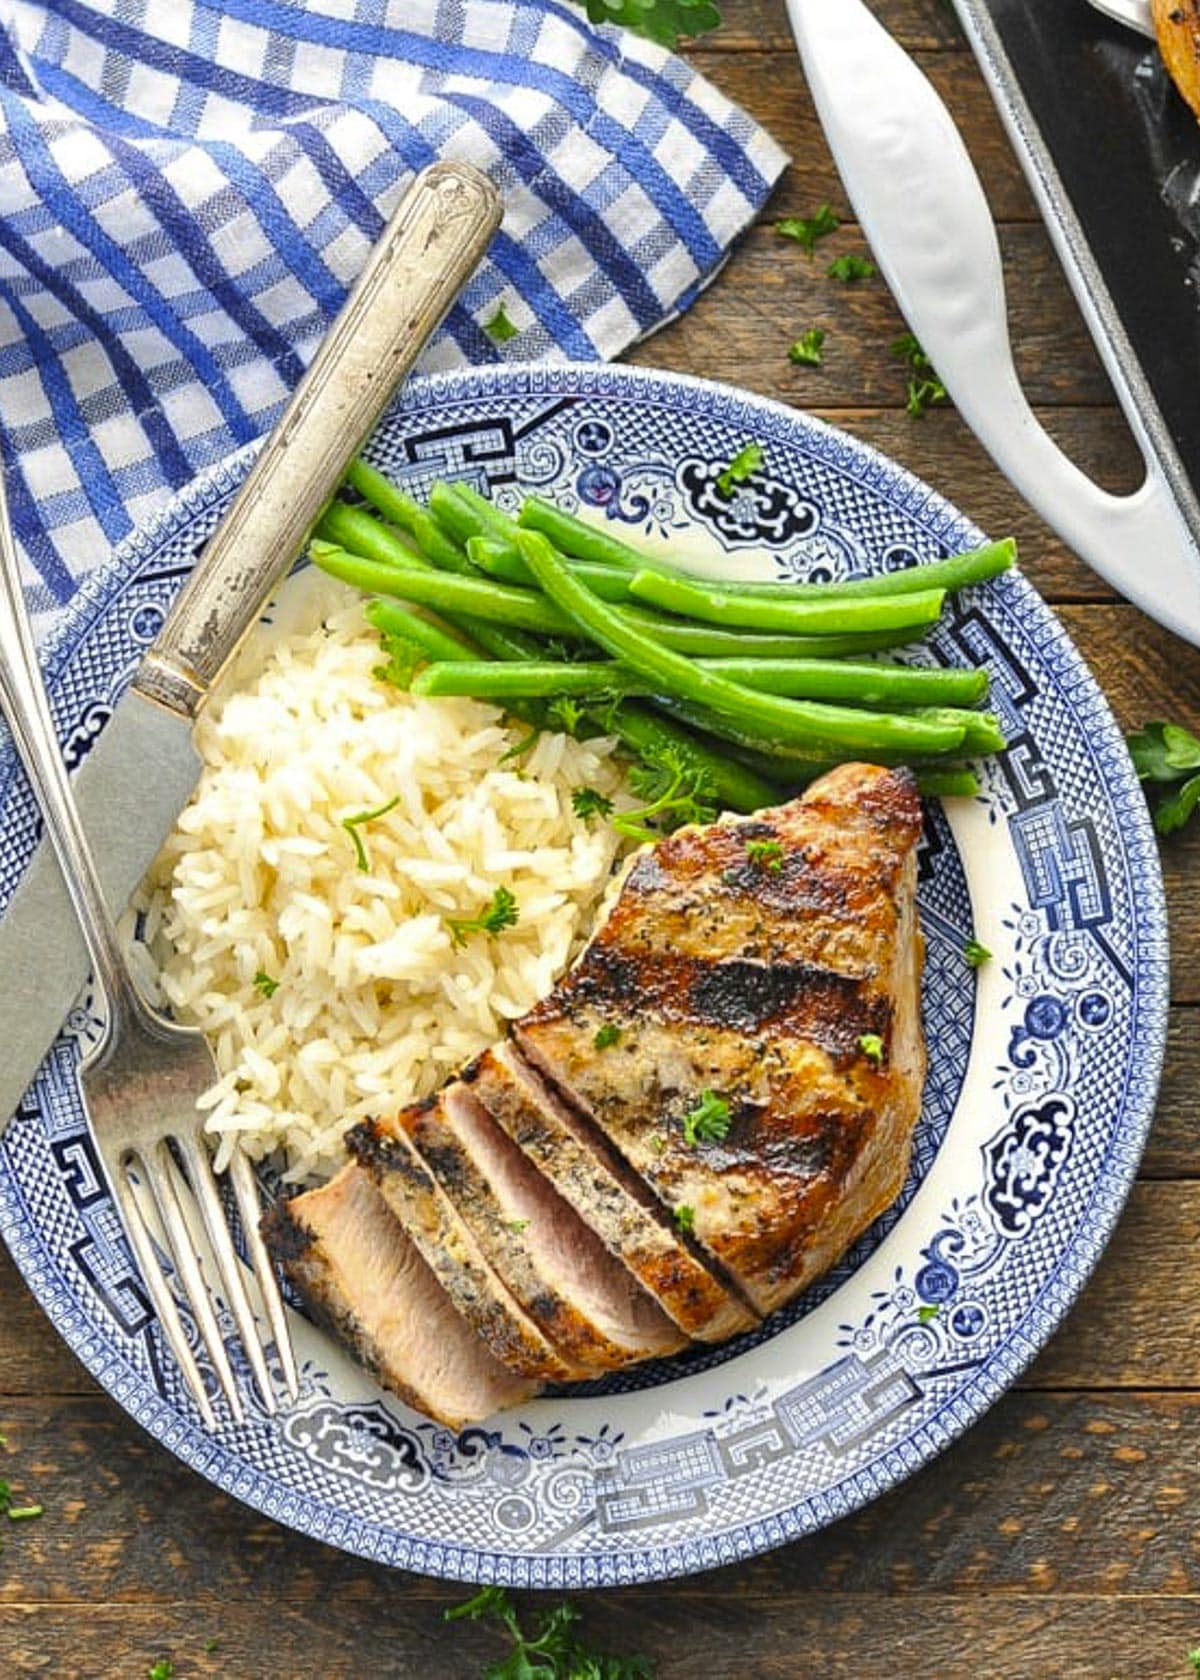 Overhead image of a plate of grilled pork chops with rice and green beans.